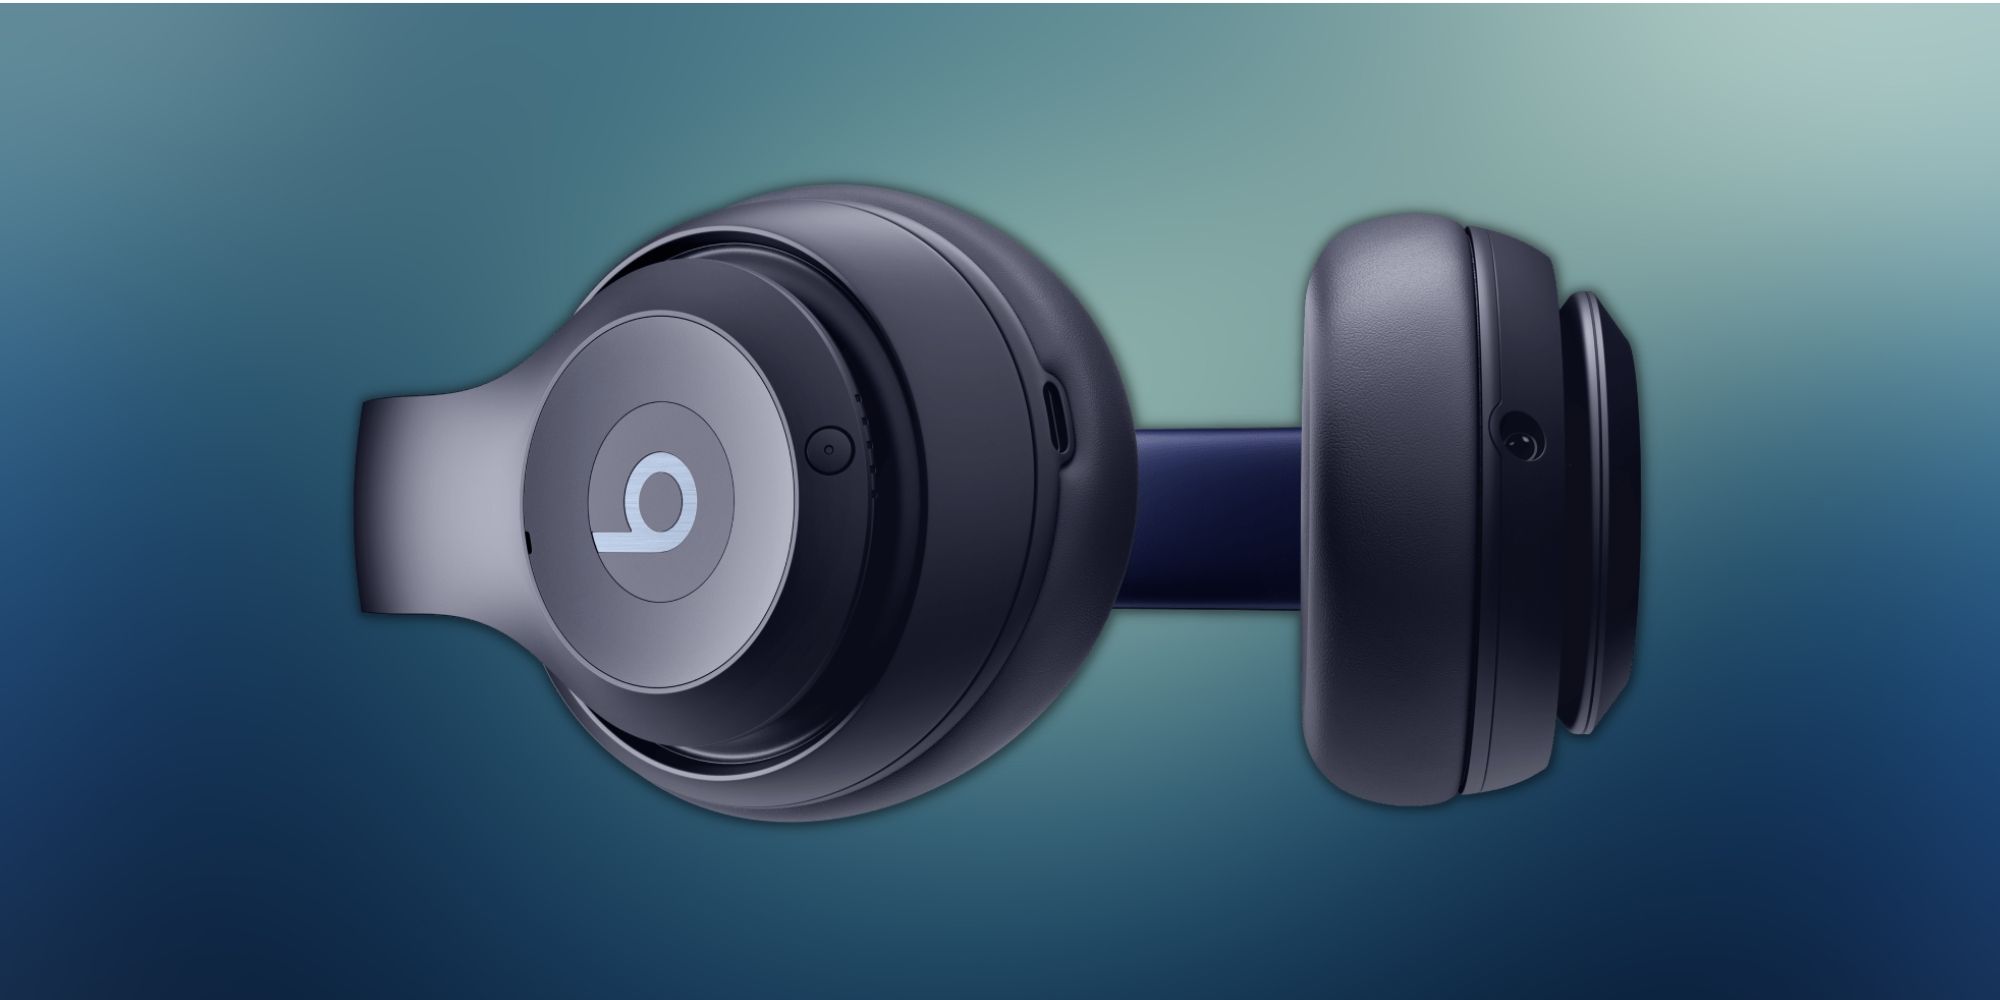 Image of the Beats Studio Pro in navy blue color